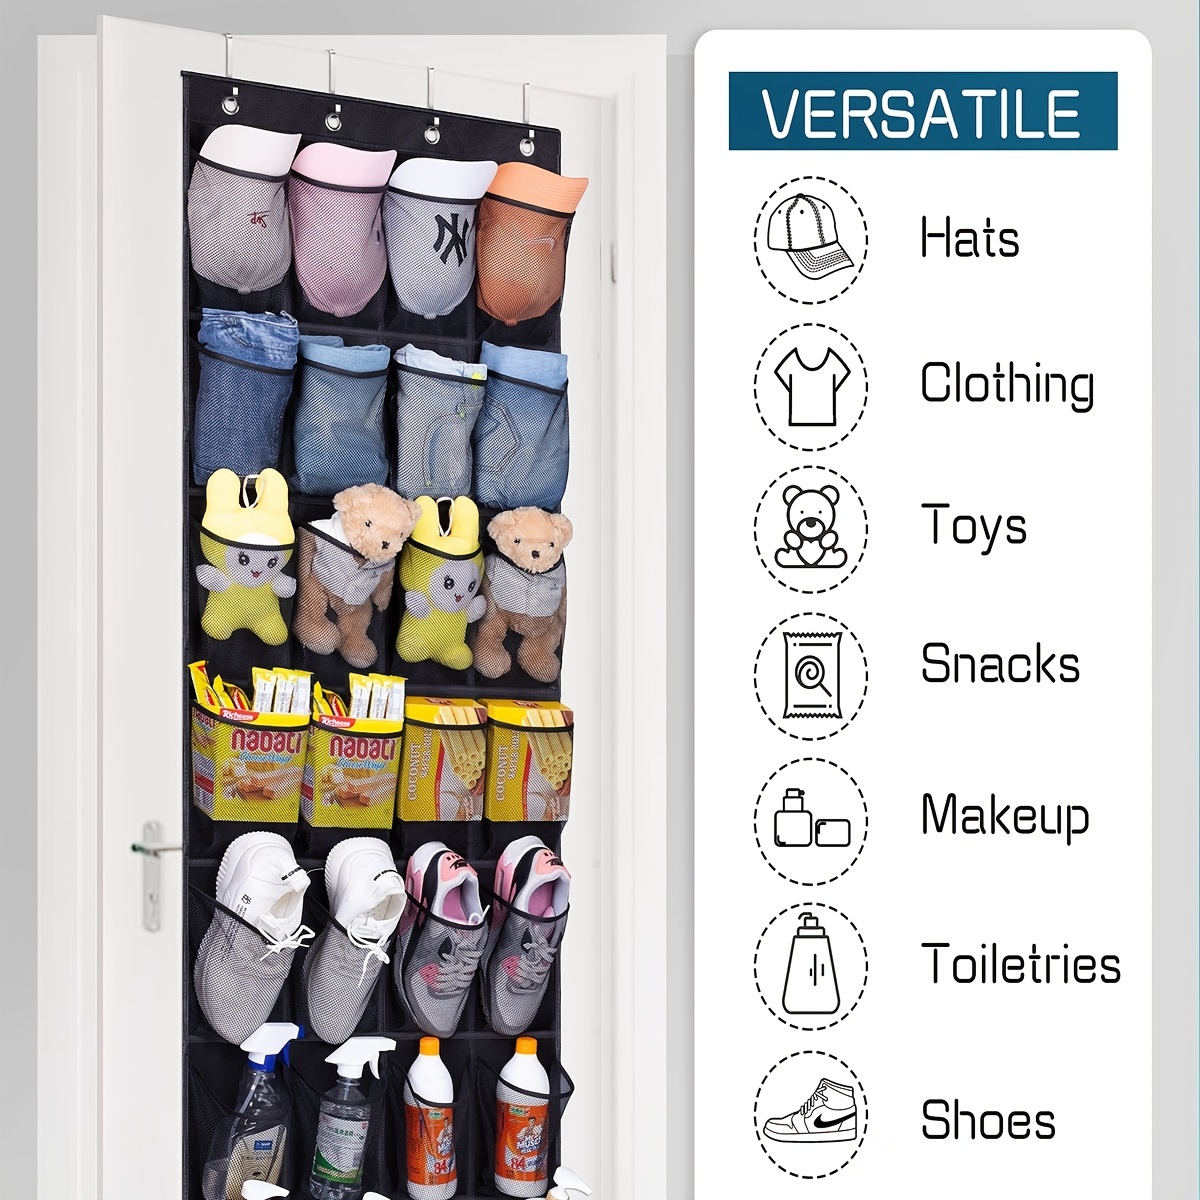 Hanging Shoe Rack Holder With 28 Extra Large Fabric Pockets For